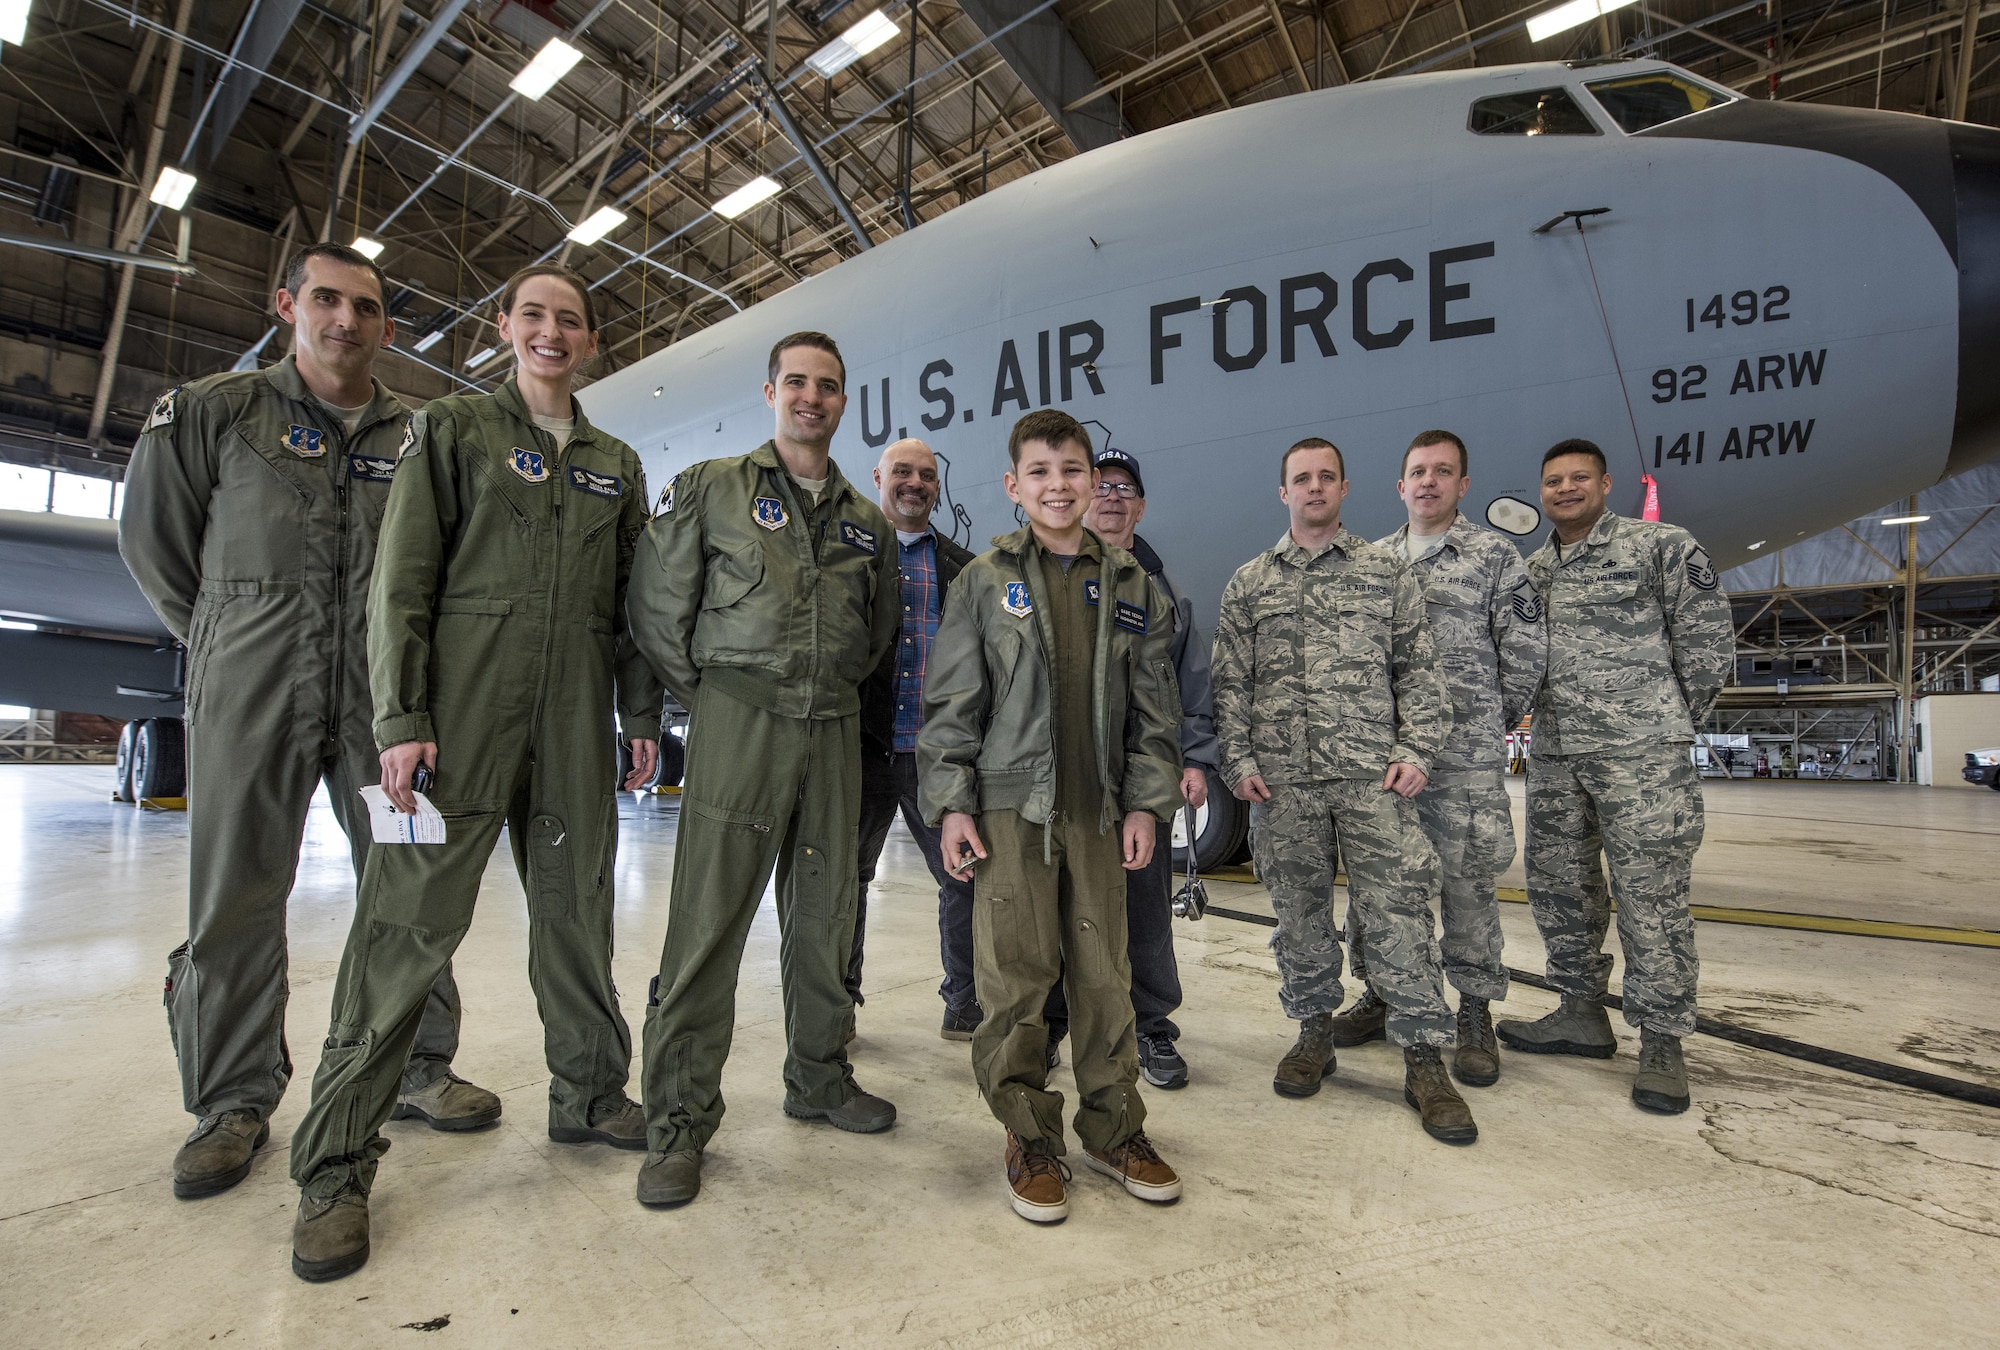 Members of the 141st Air Refueling Wing pose with "Pilot for a Day" candidate Gabe Tesch during a tour of a KC-135 Stratotanker static display Mar. 1, 2017, at Fairchild Air Force Base, Washington. Gabe spent the day visiting several work centers throughout the base receiving hands on instruction and briefings on what it takes to be a KC-135 pilot. The "Pilot for a Day" program provides disadvantaged or seriously ill children a chance to spend the day with members of the Washington Air National Guard training as an honorary pilot. (U.S. Air Force photo by Master Sgt. Michael Stewart/Released) 
